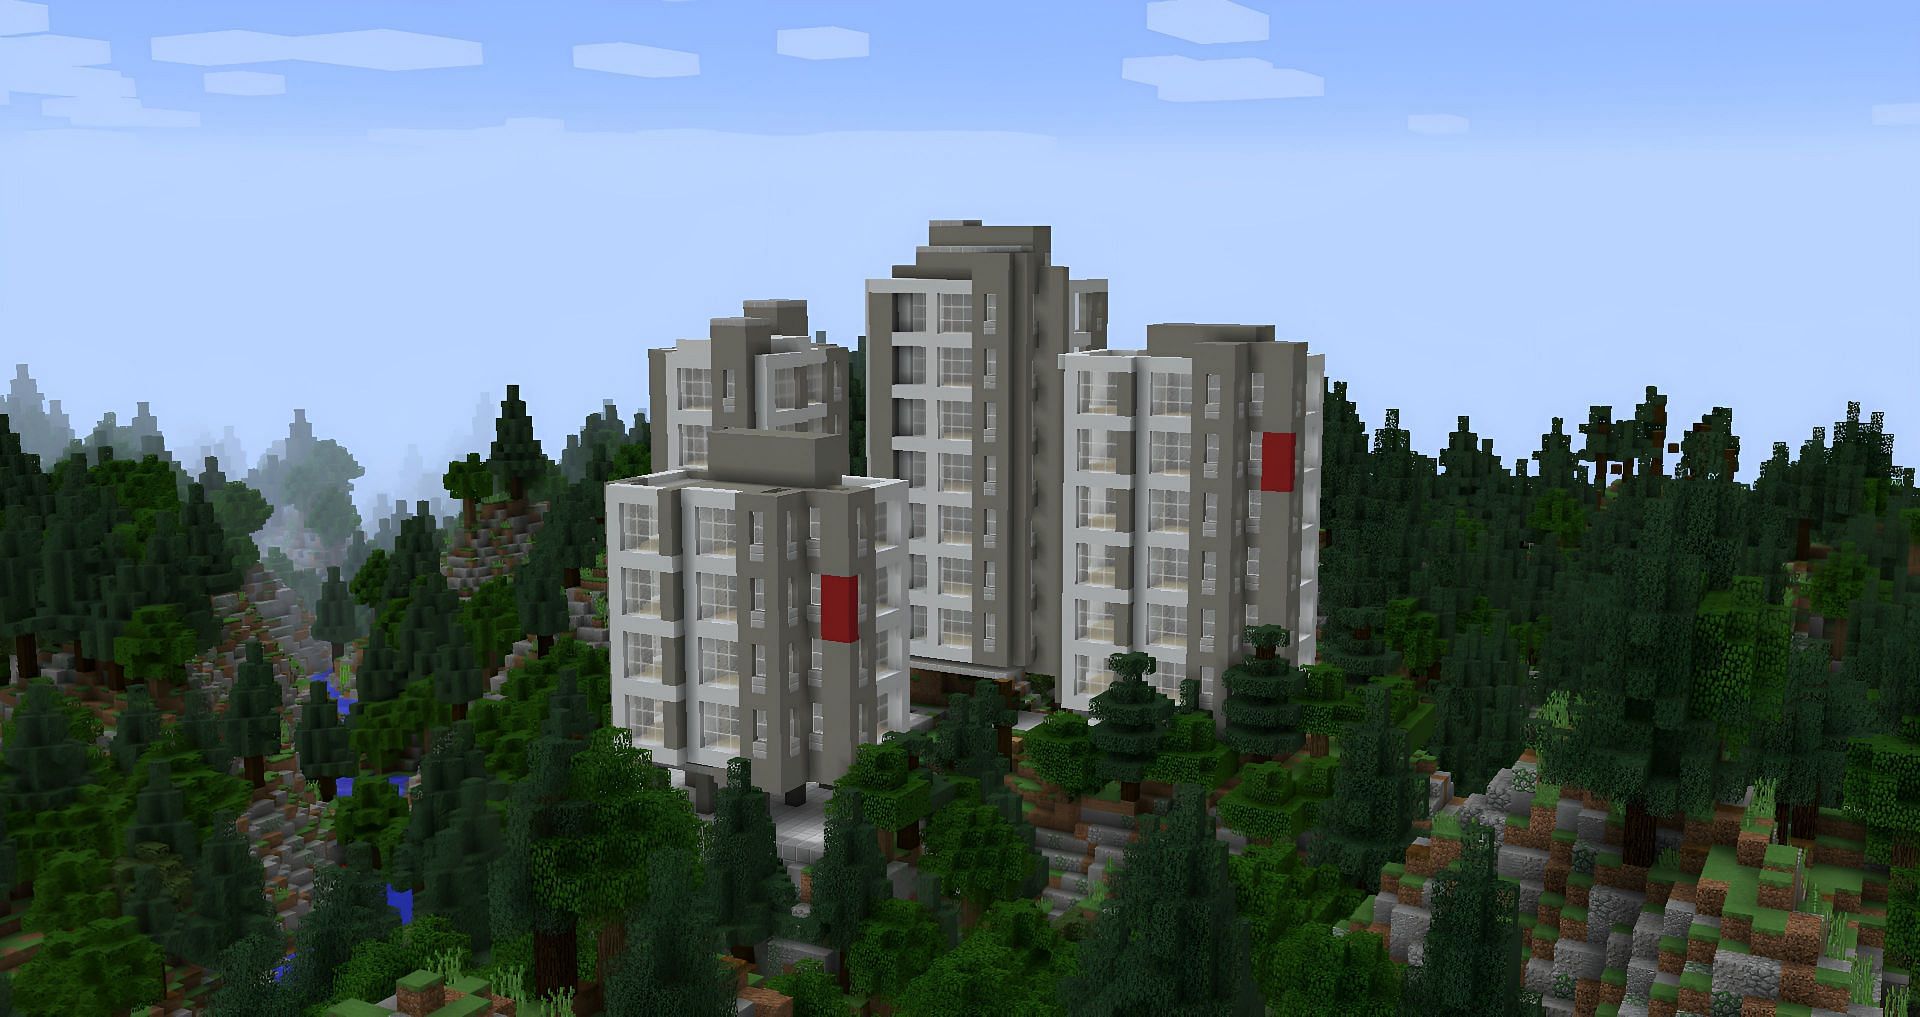 Minecraft apartment buildings can be made to look just like real life (Image via Reddit/u/tannerge)